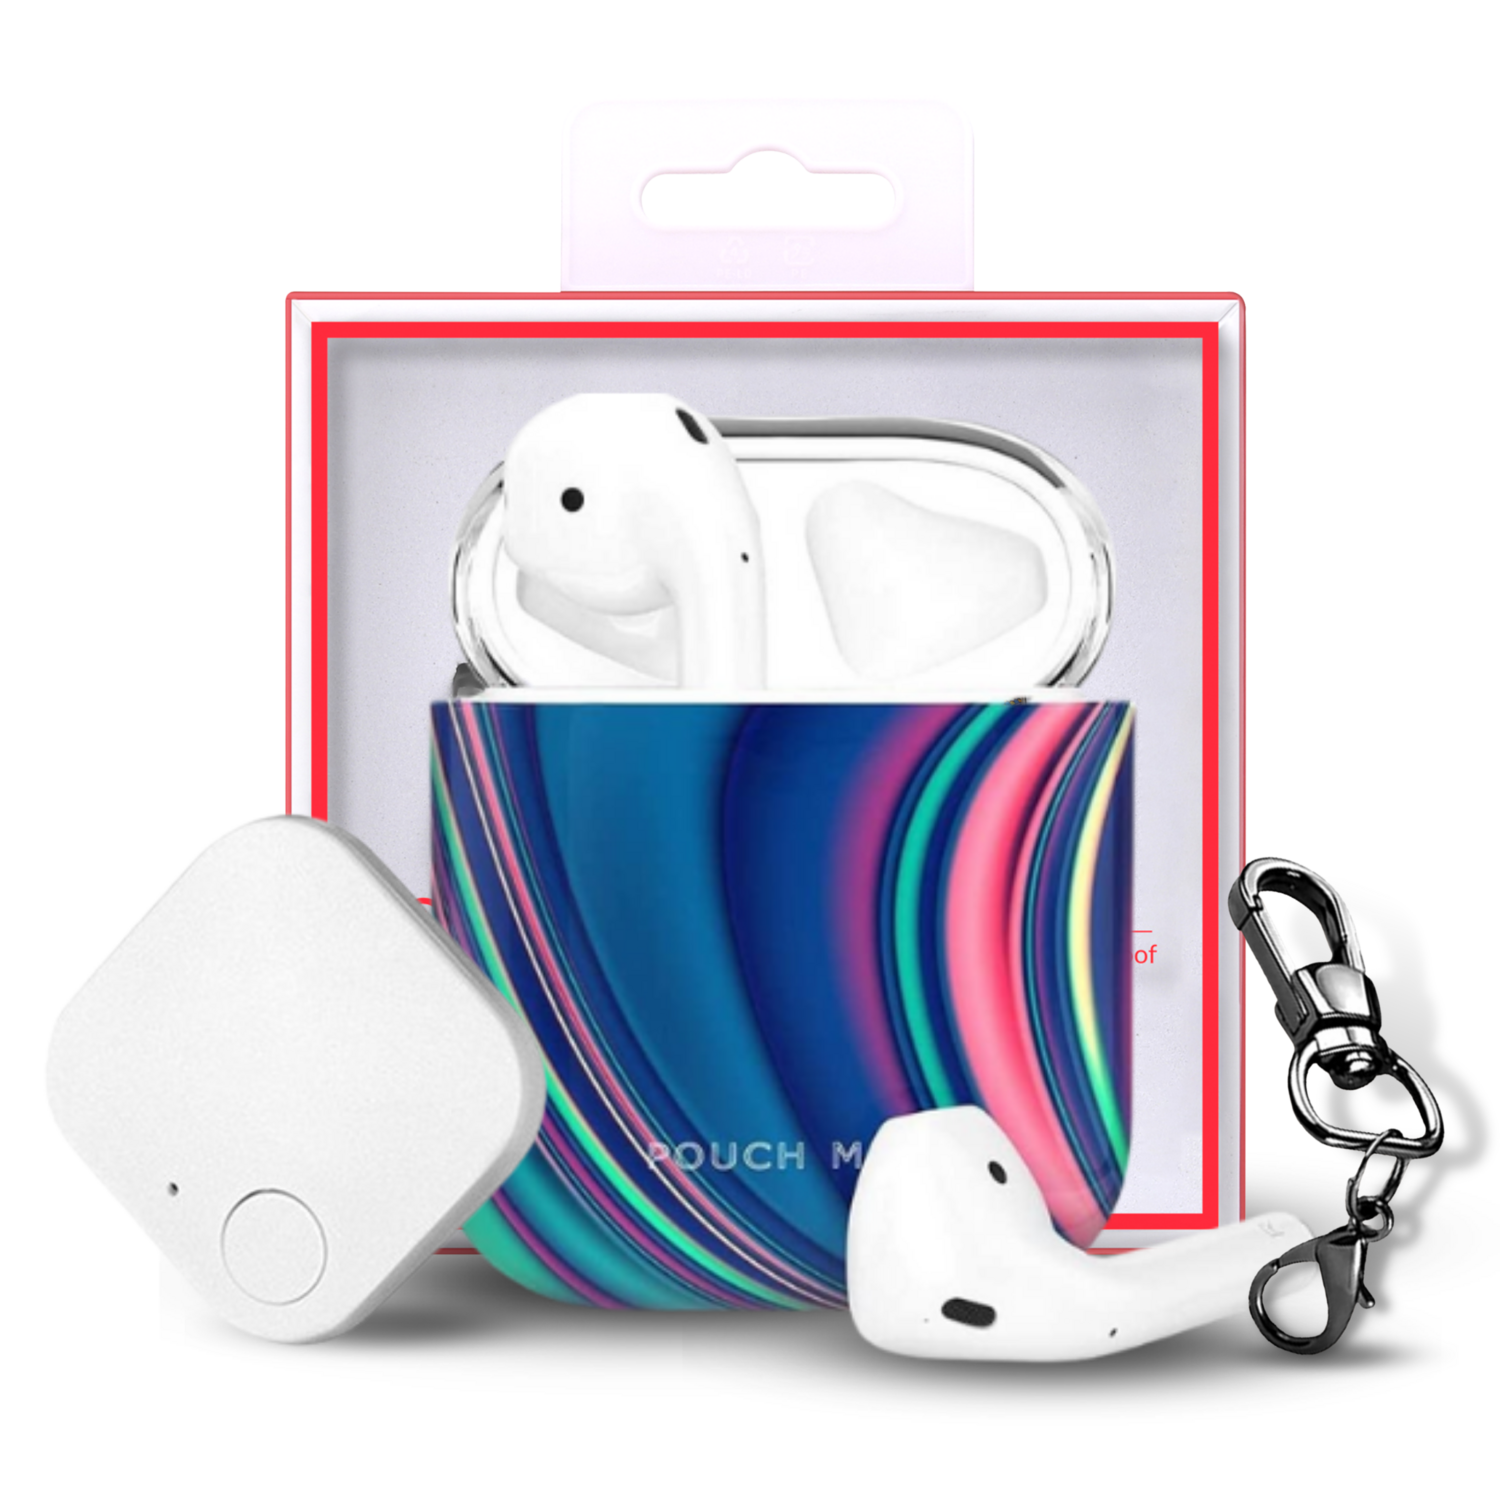 Finder Series™ Airpods Case Cover Gen 1 & 2 With Tracker Tile by Pouch Me - Pastel River